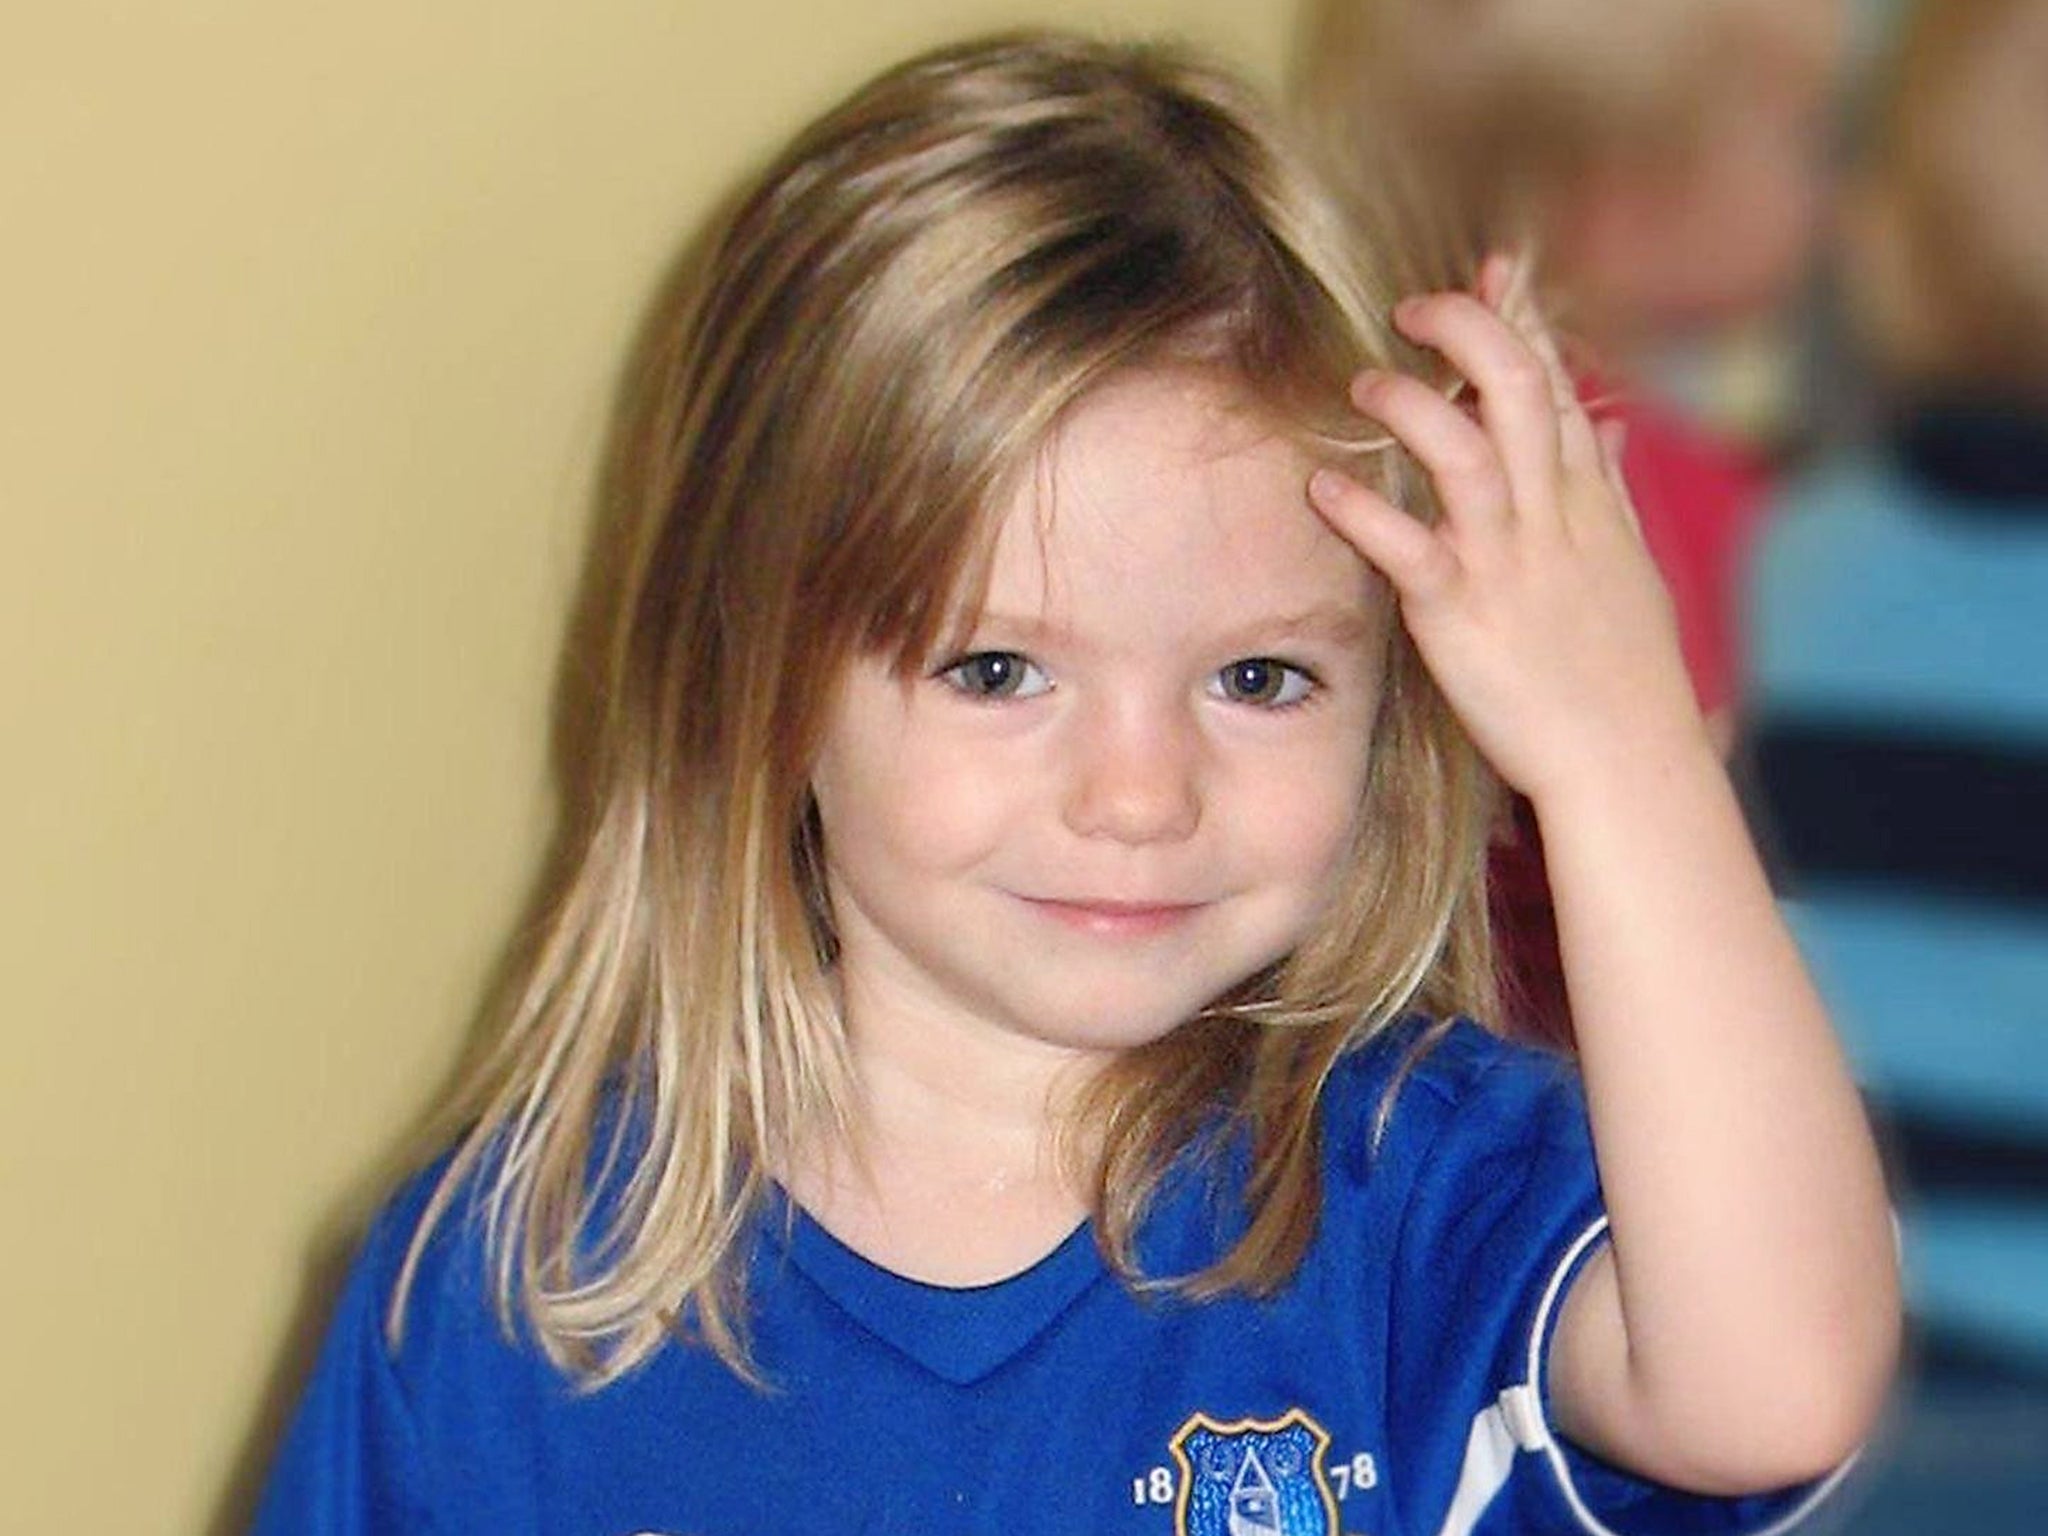 Madeleine McCann went missing ten years ago, sparking one of the biggest missing person investigations of all time